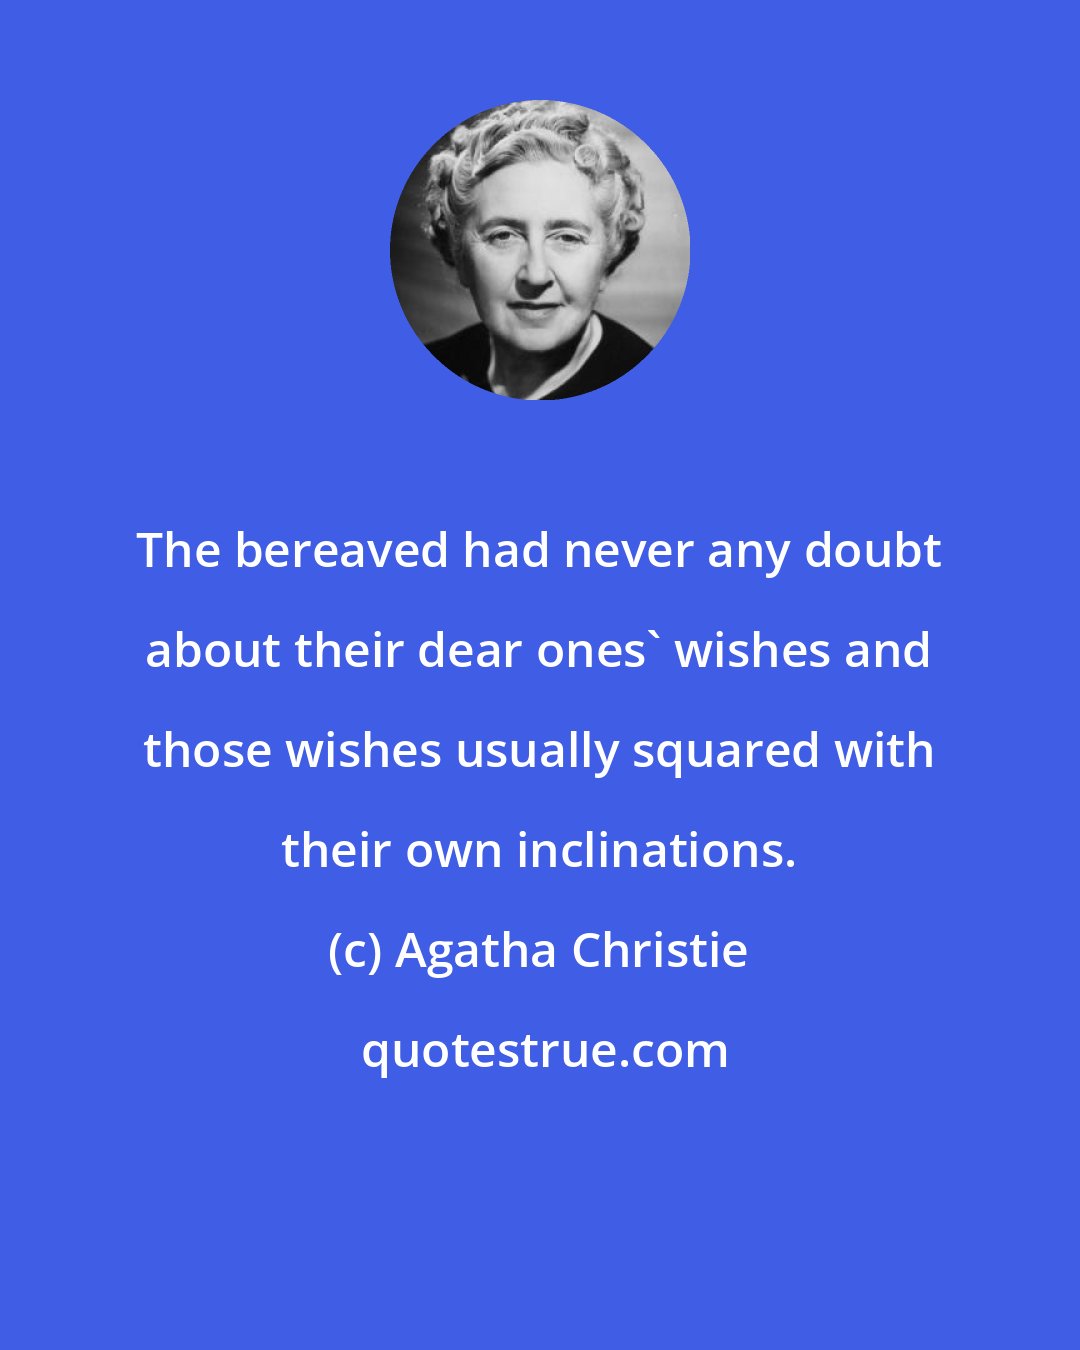 Agatha Christie: The bereaved had never any doubt about their dear ones' wishes and those wishes usually squared with their own inclinations.